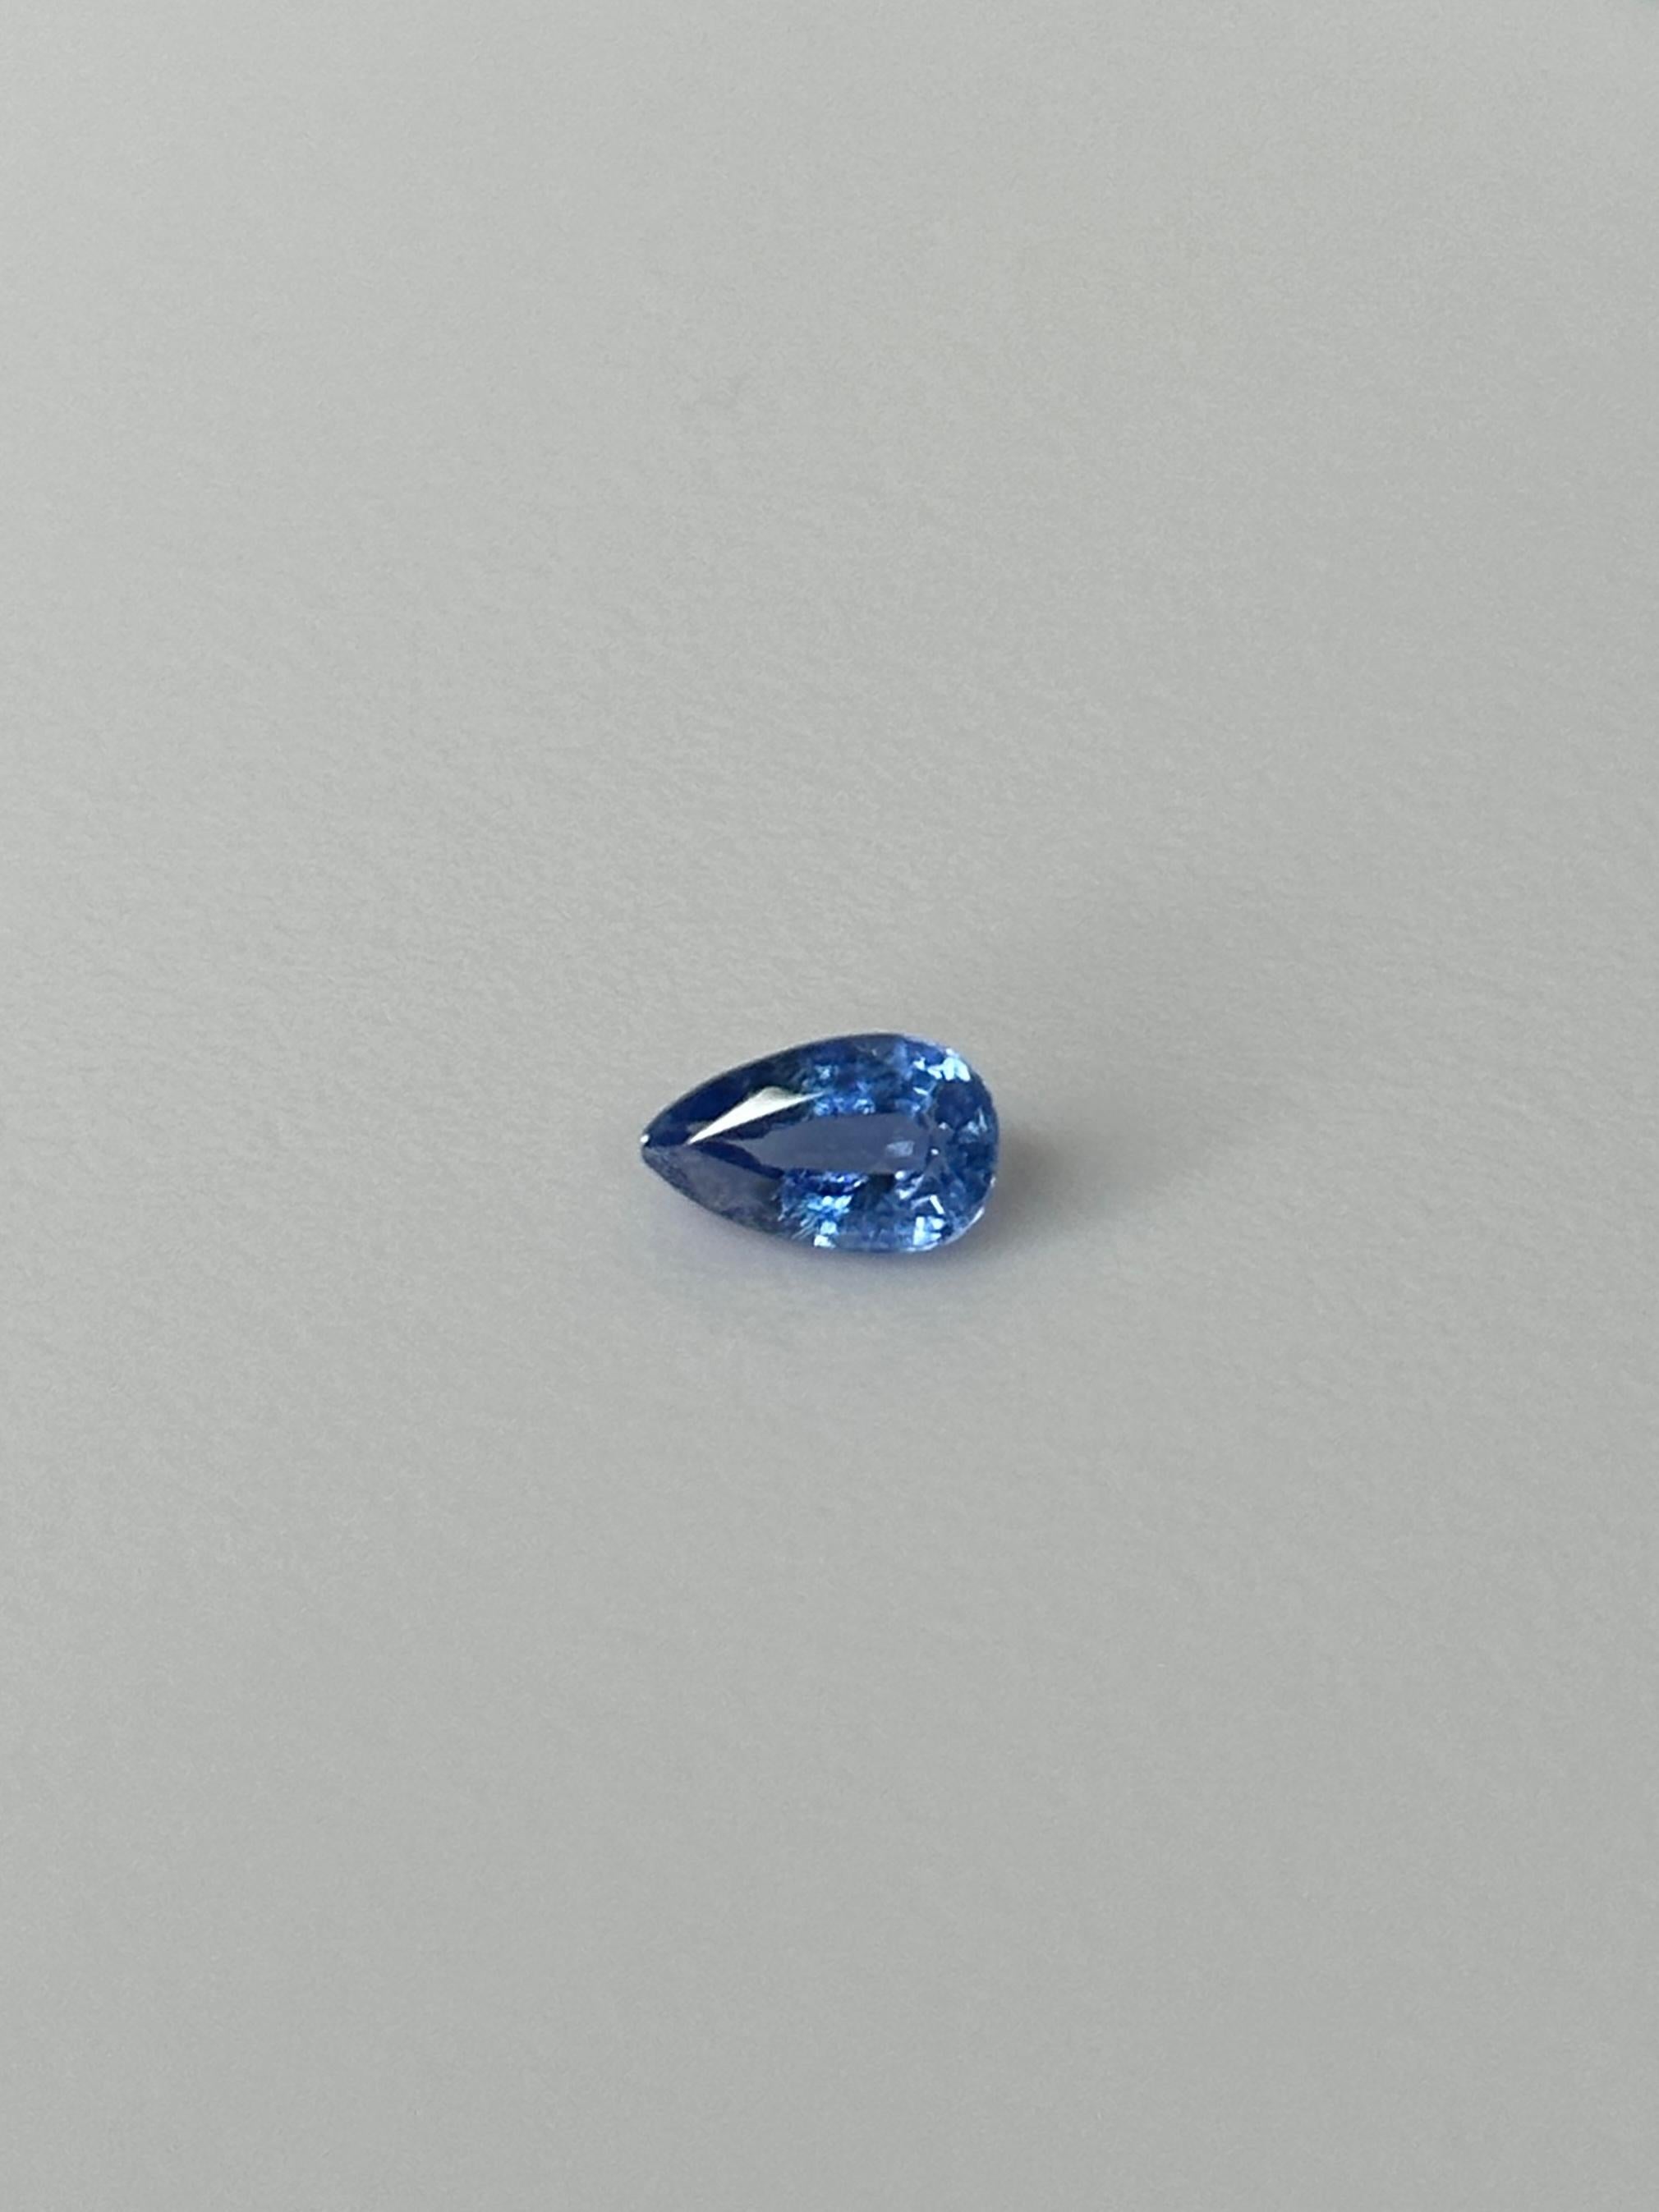 Kyanite, a semi-precious gemstone with a unique delicate blue that can be found all throughout the world.
But the highest quality kyanite with the strongest and deepest blues can be found in Mountainous Nepal and Tibet.
This 1.30 carat kyanite shows